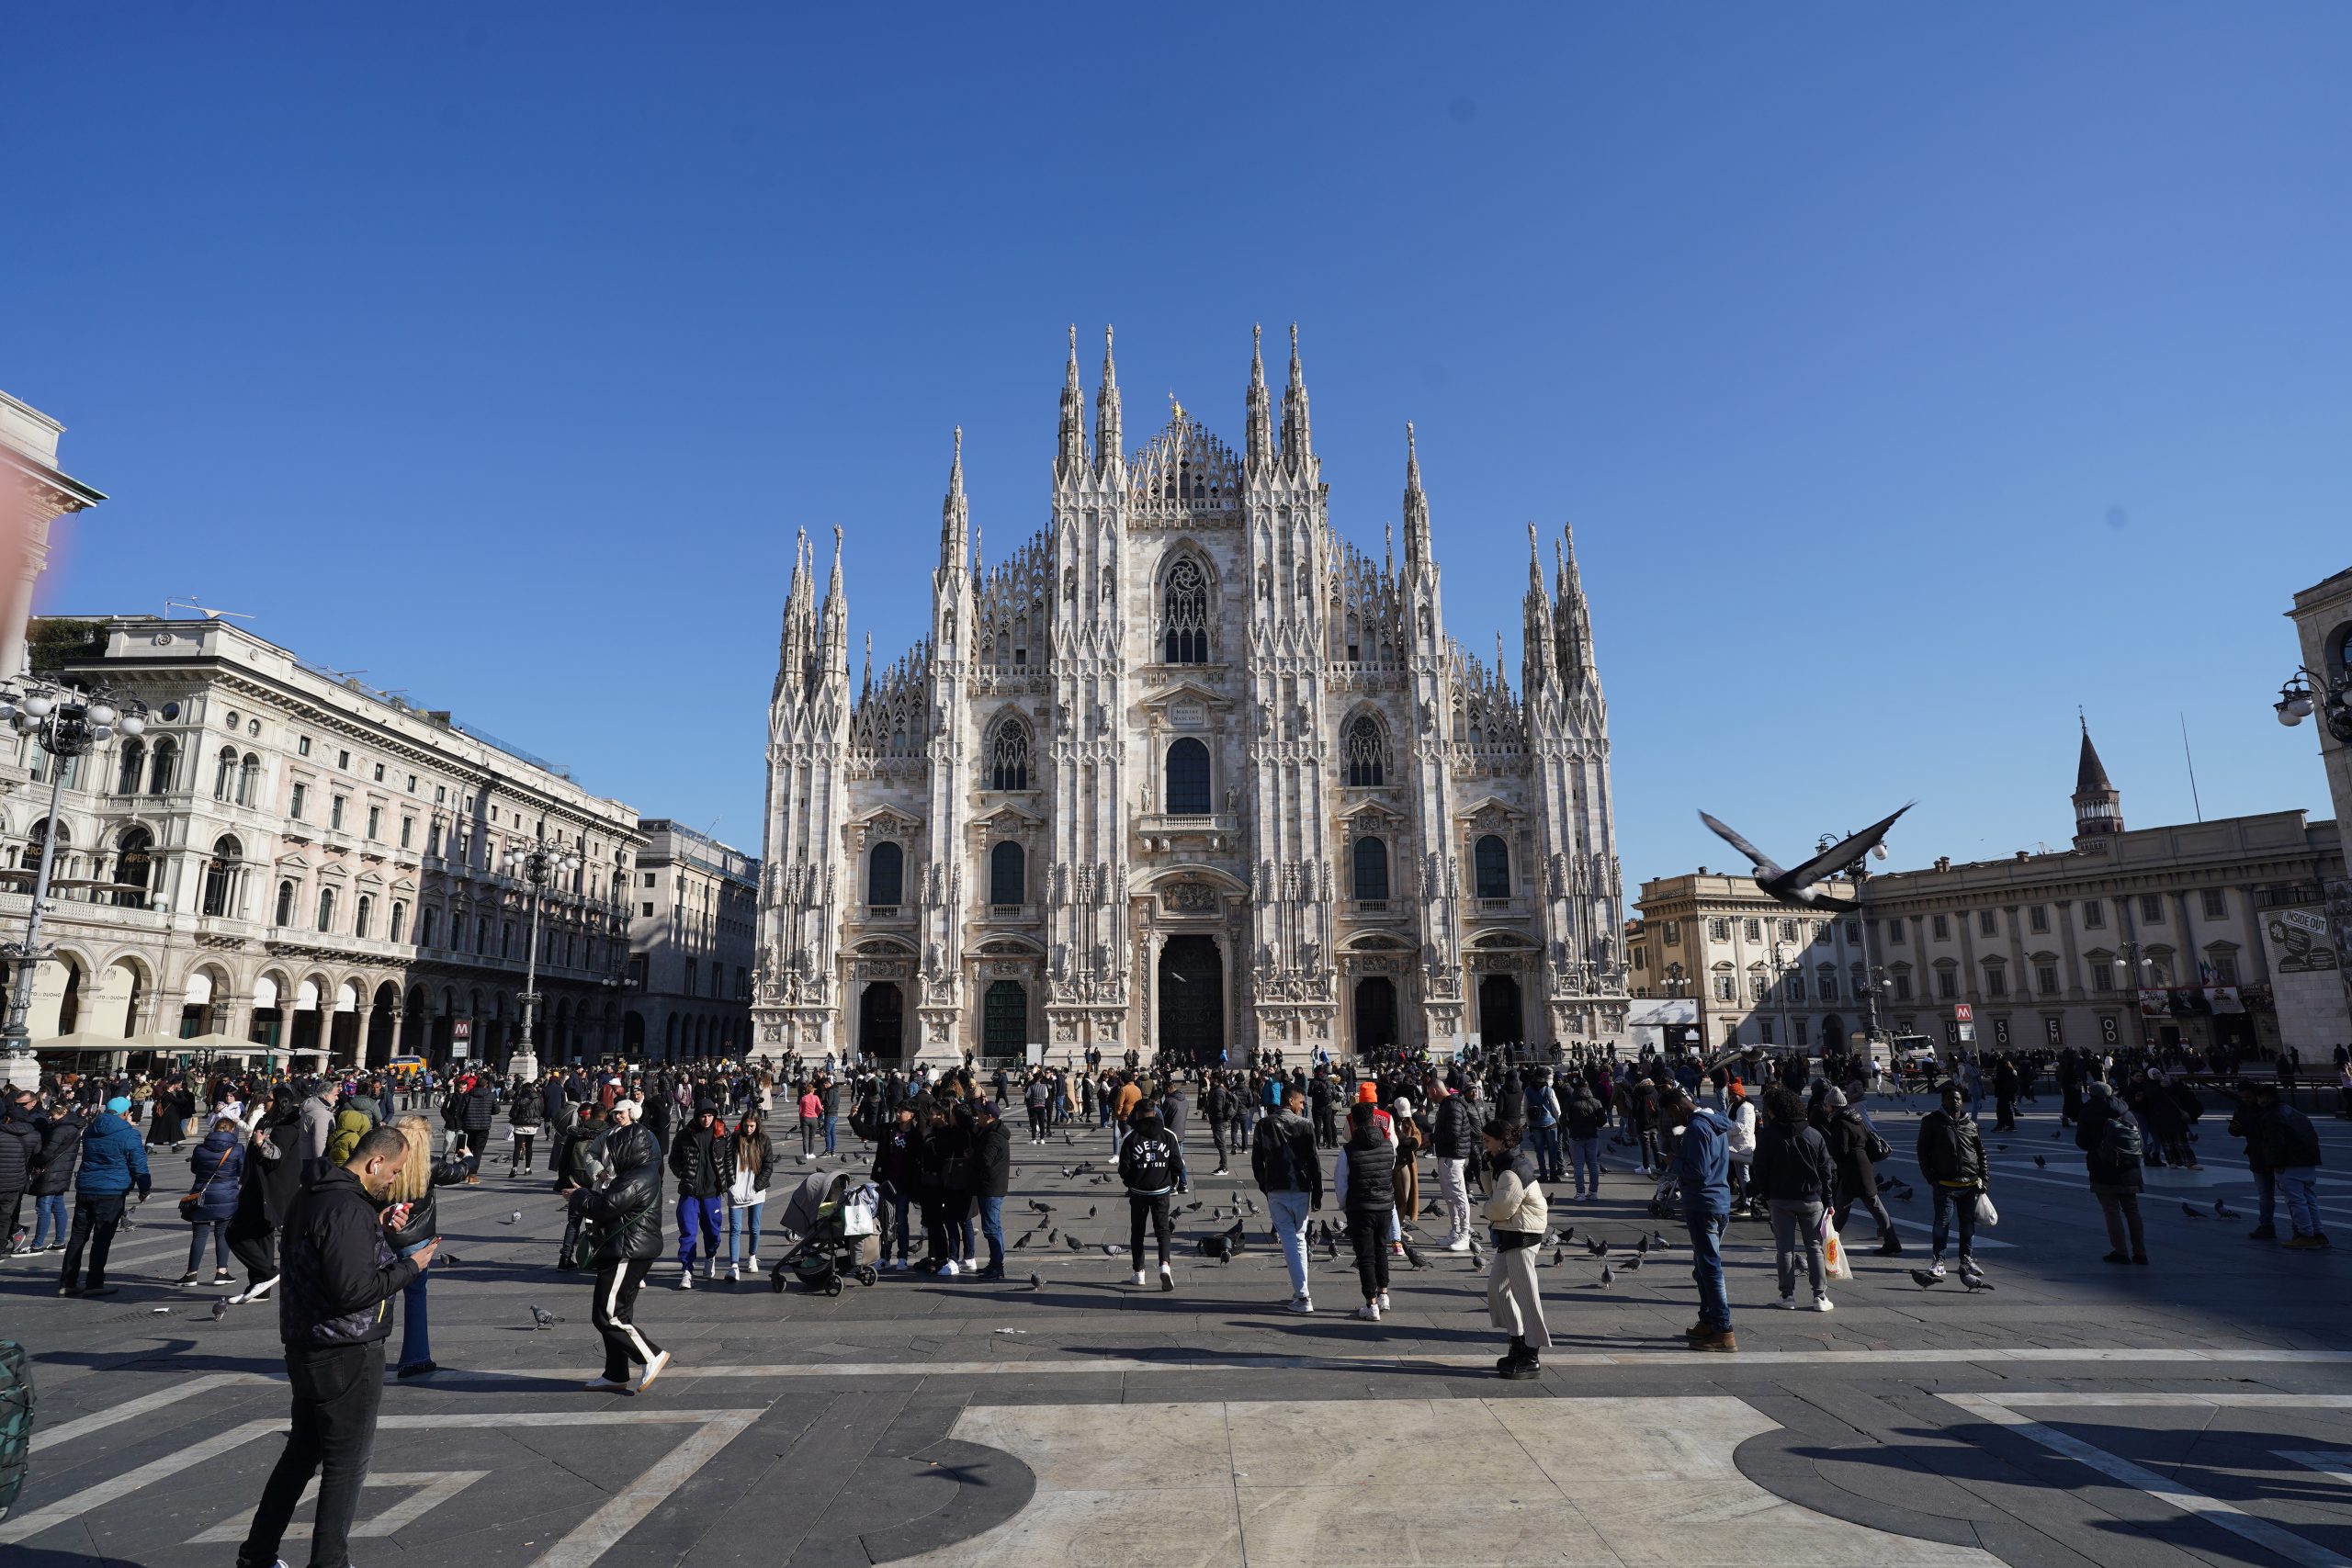 Duomo di Milano, also known as the Milan Cathedral, is one of the largest Gothic cathedrals in the world,